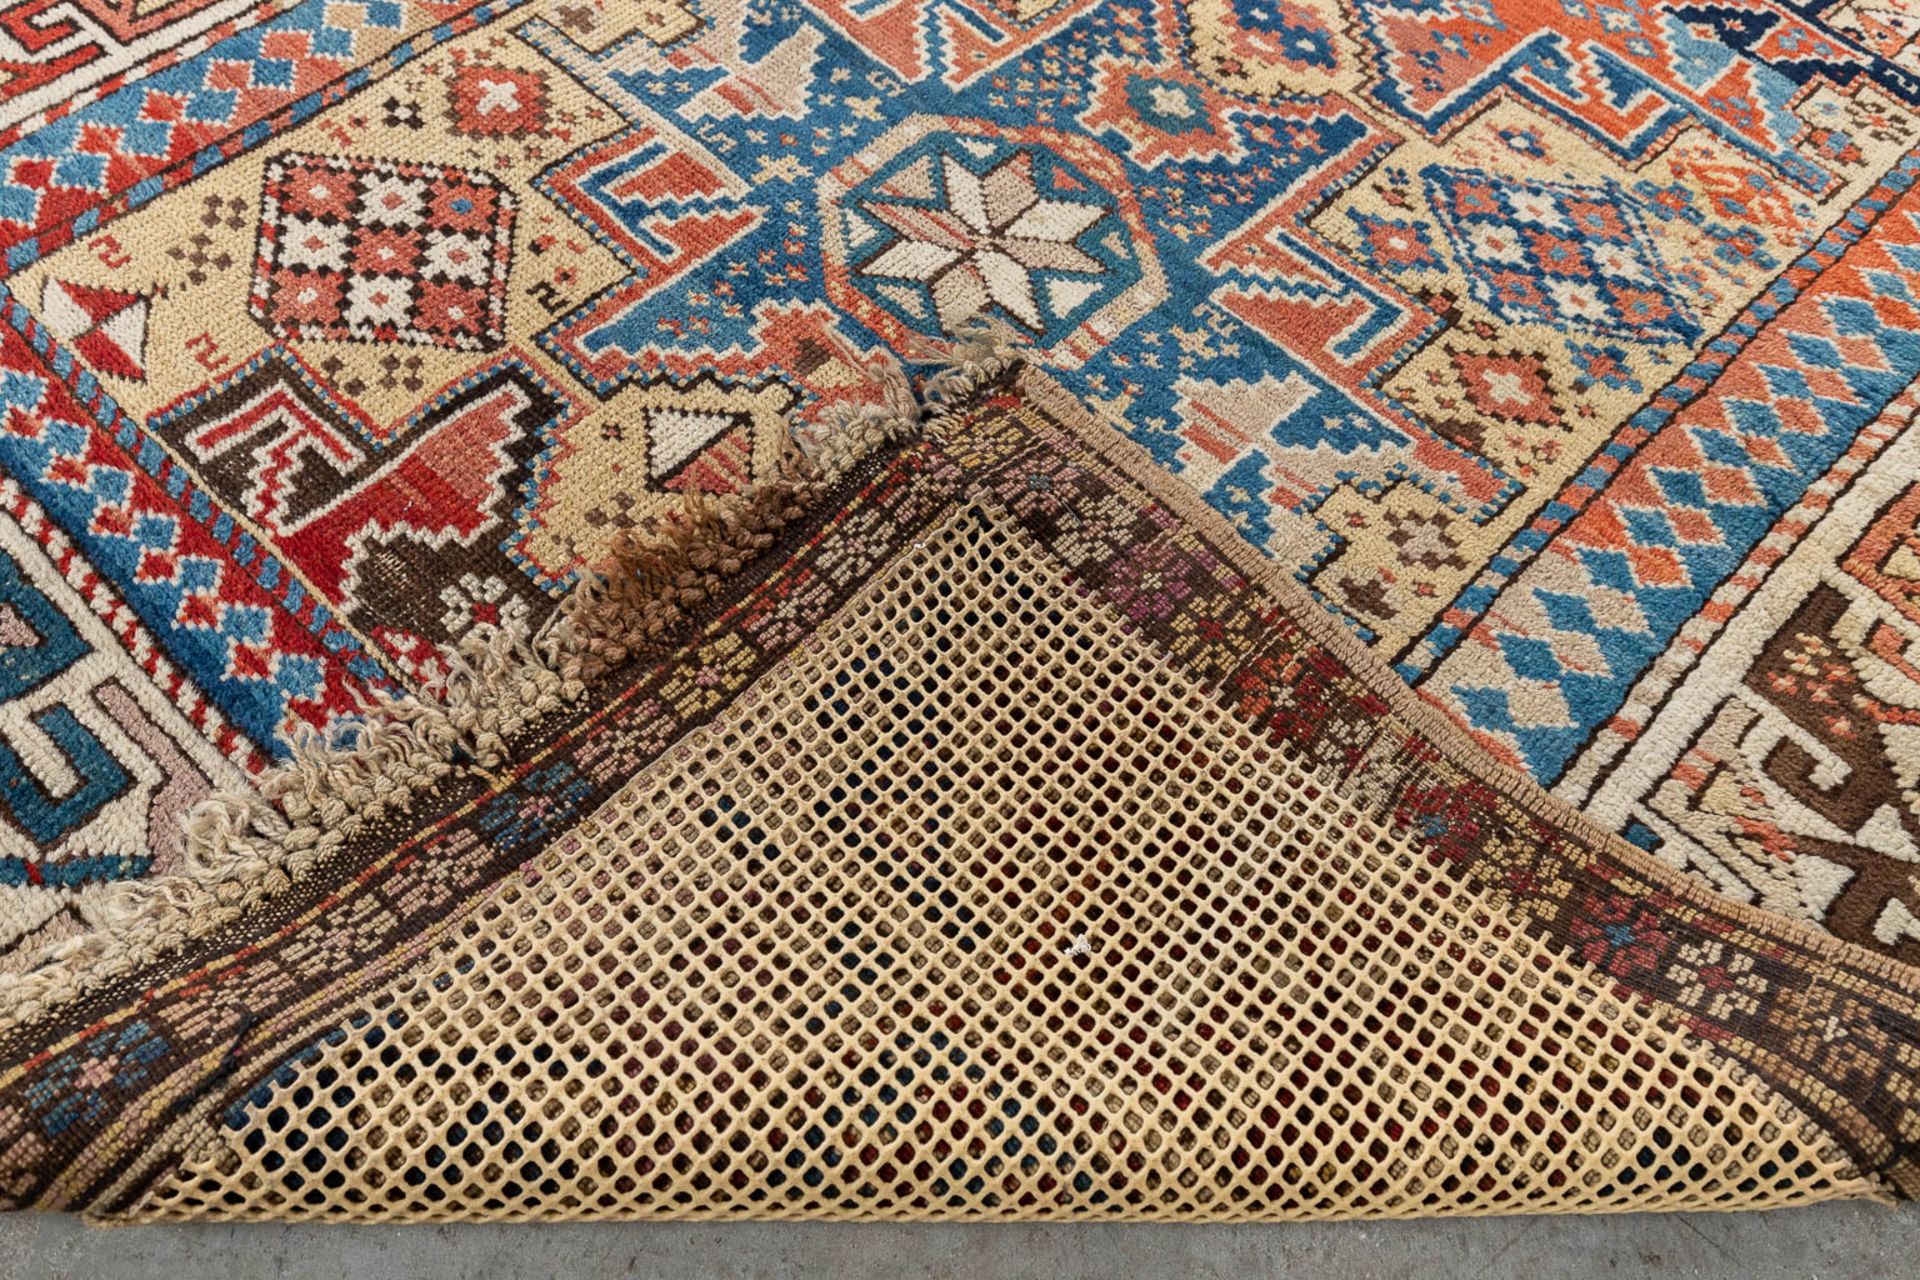 A collection of 2 Oriental hand-made carpets. Probably Caucasian. (L: 277 x W: 115 cm) - Image 10 of 12